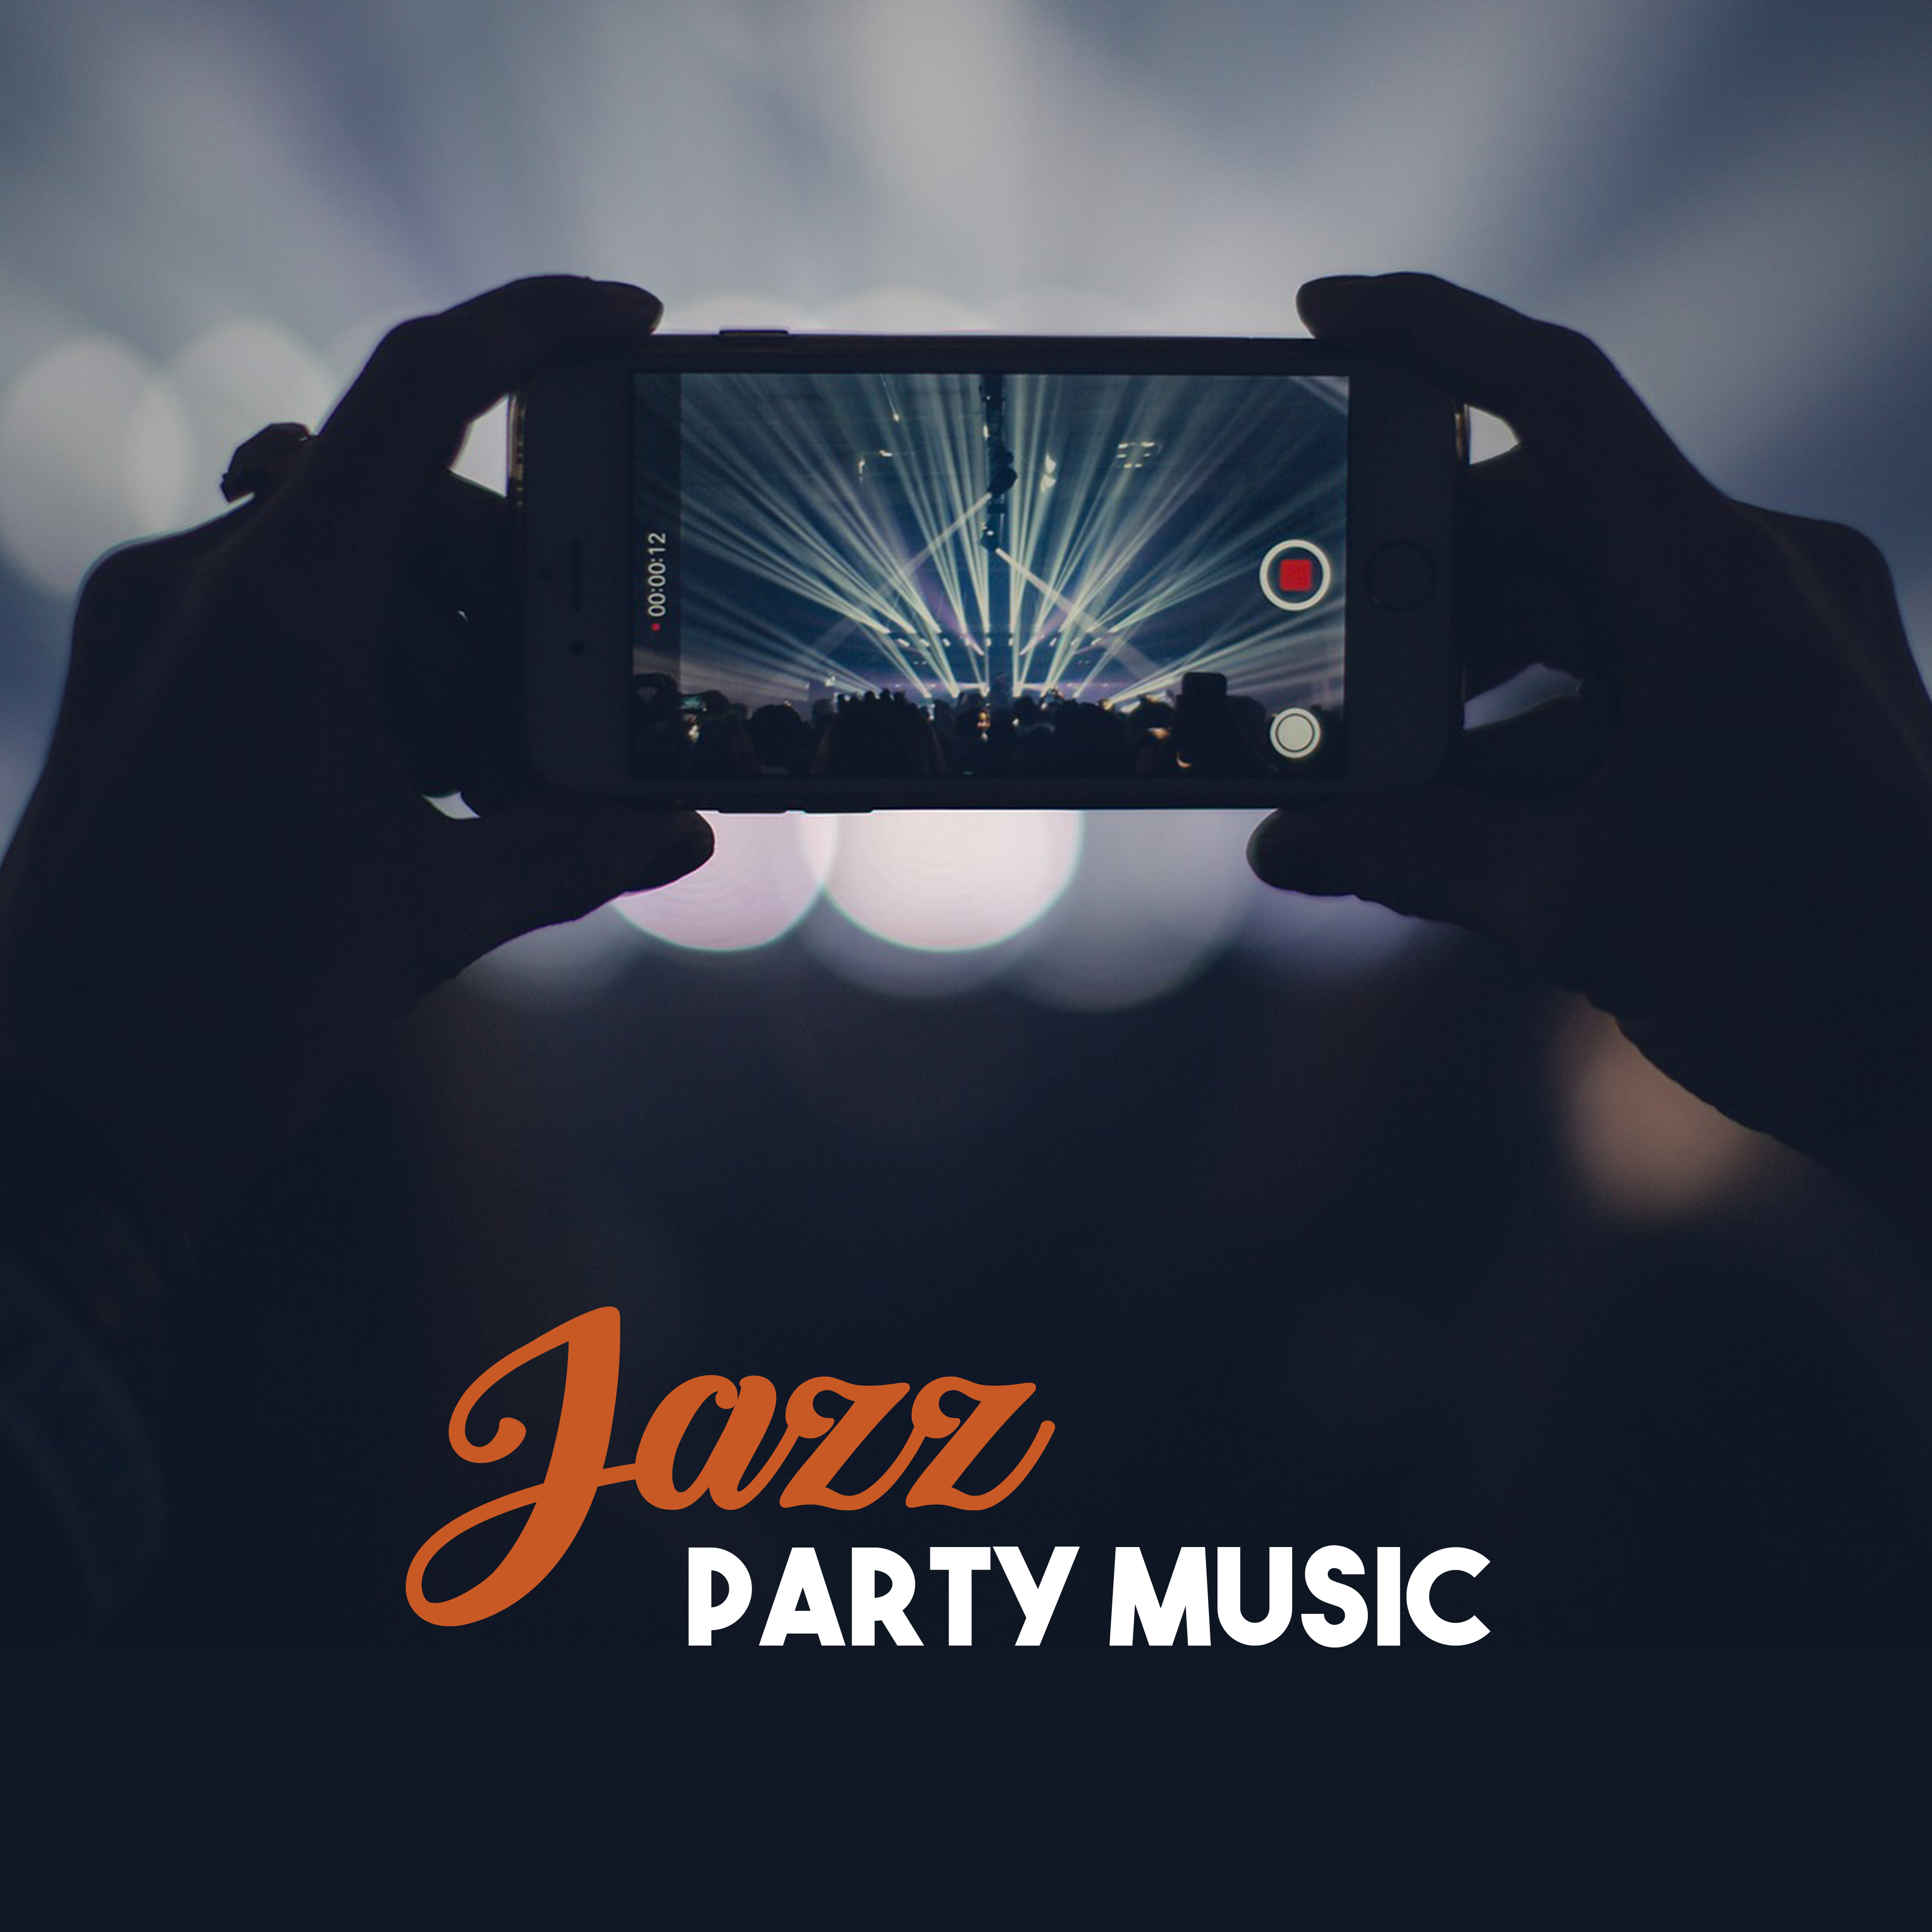 Jazz Party Music – Ambient Jazz, Music for Cocktail Party, Piano Bar Lounge